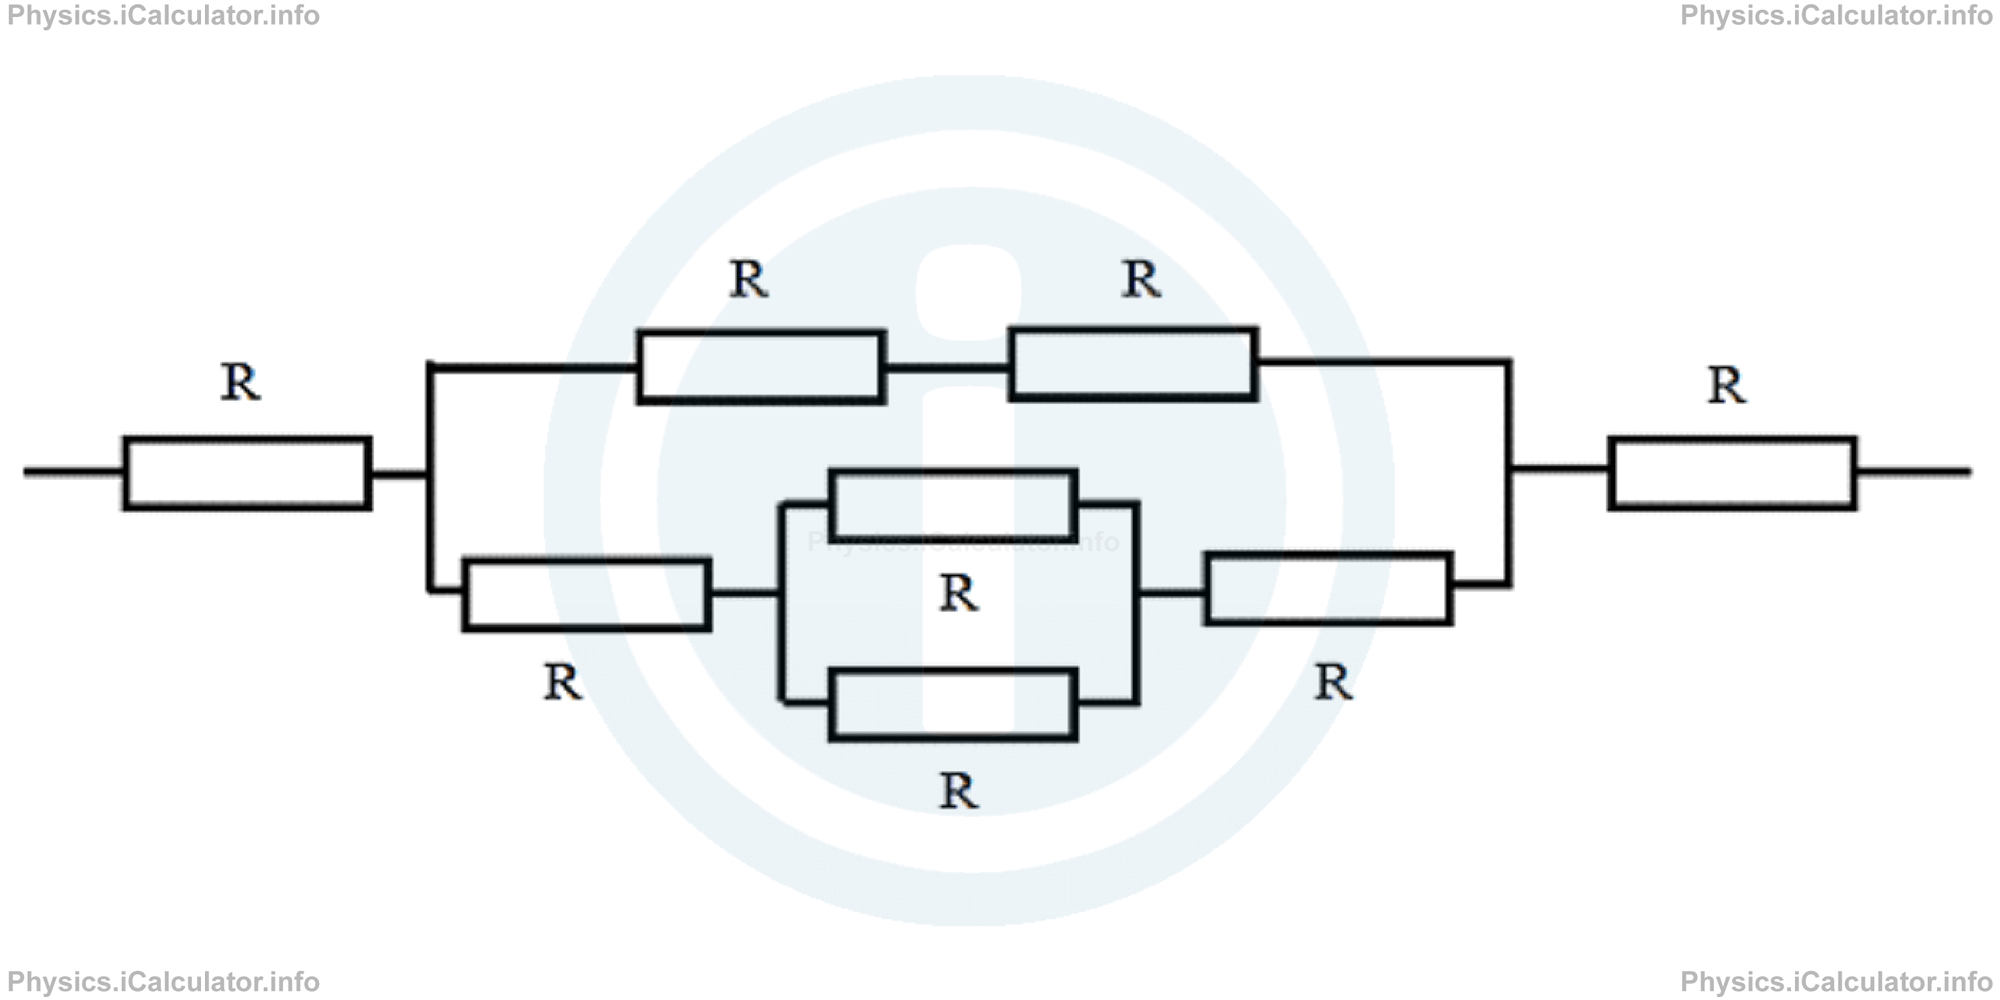 Physics Tutorials: This image provides visual information for the physics tutorial Electric Resistance. Combinations of Resistors 